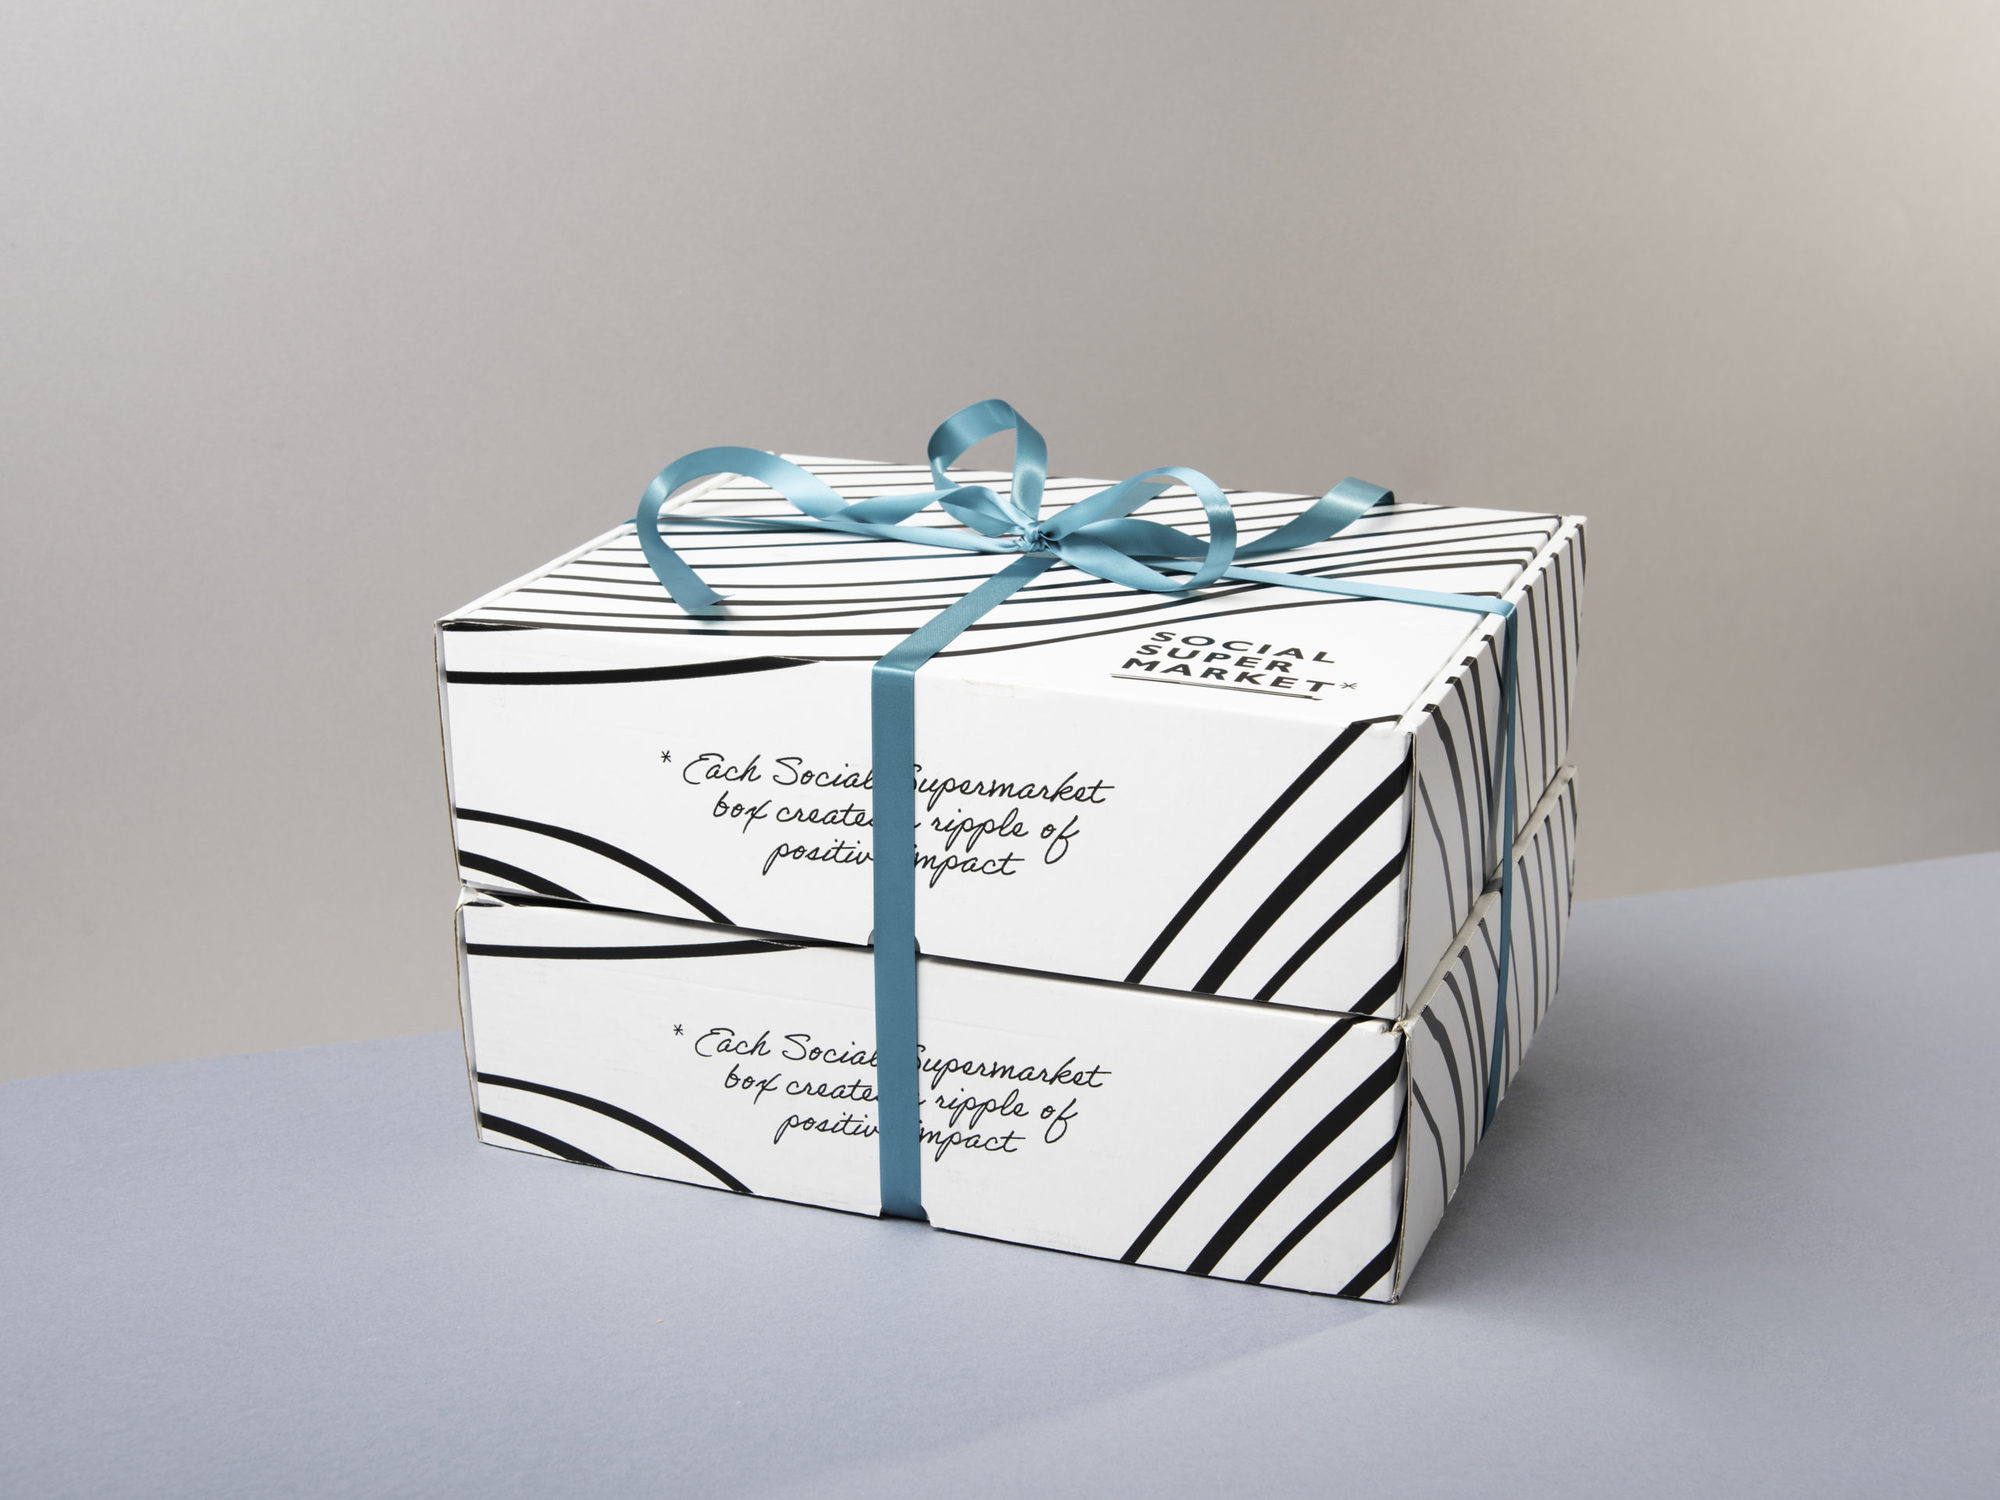 The Thinking of You Morale Booster Gift Box - Box Tower